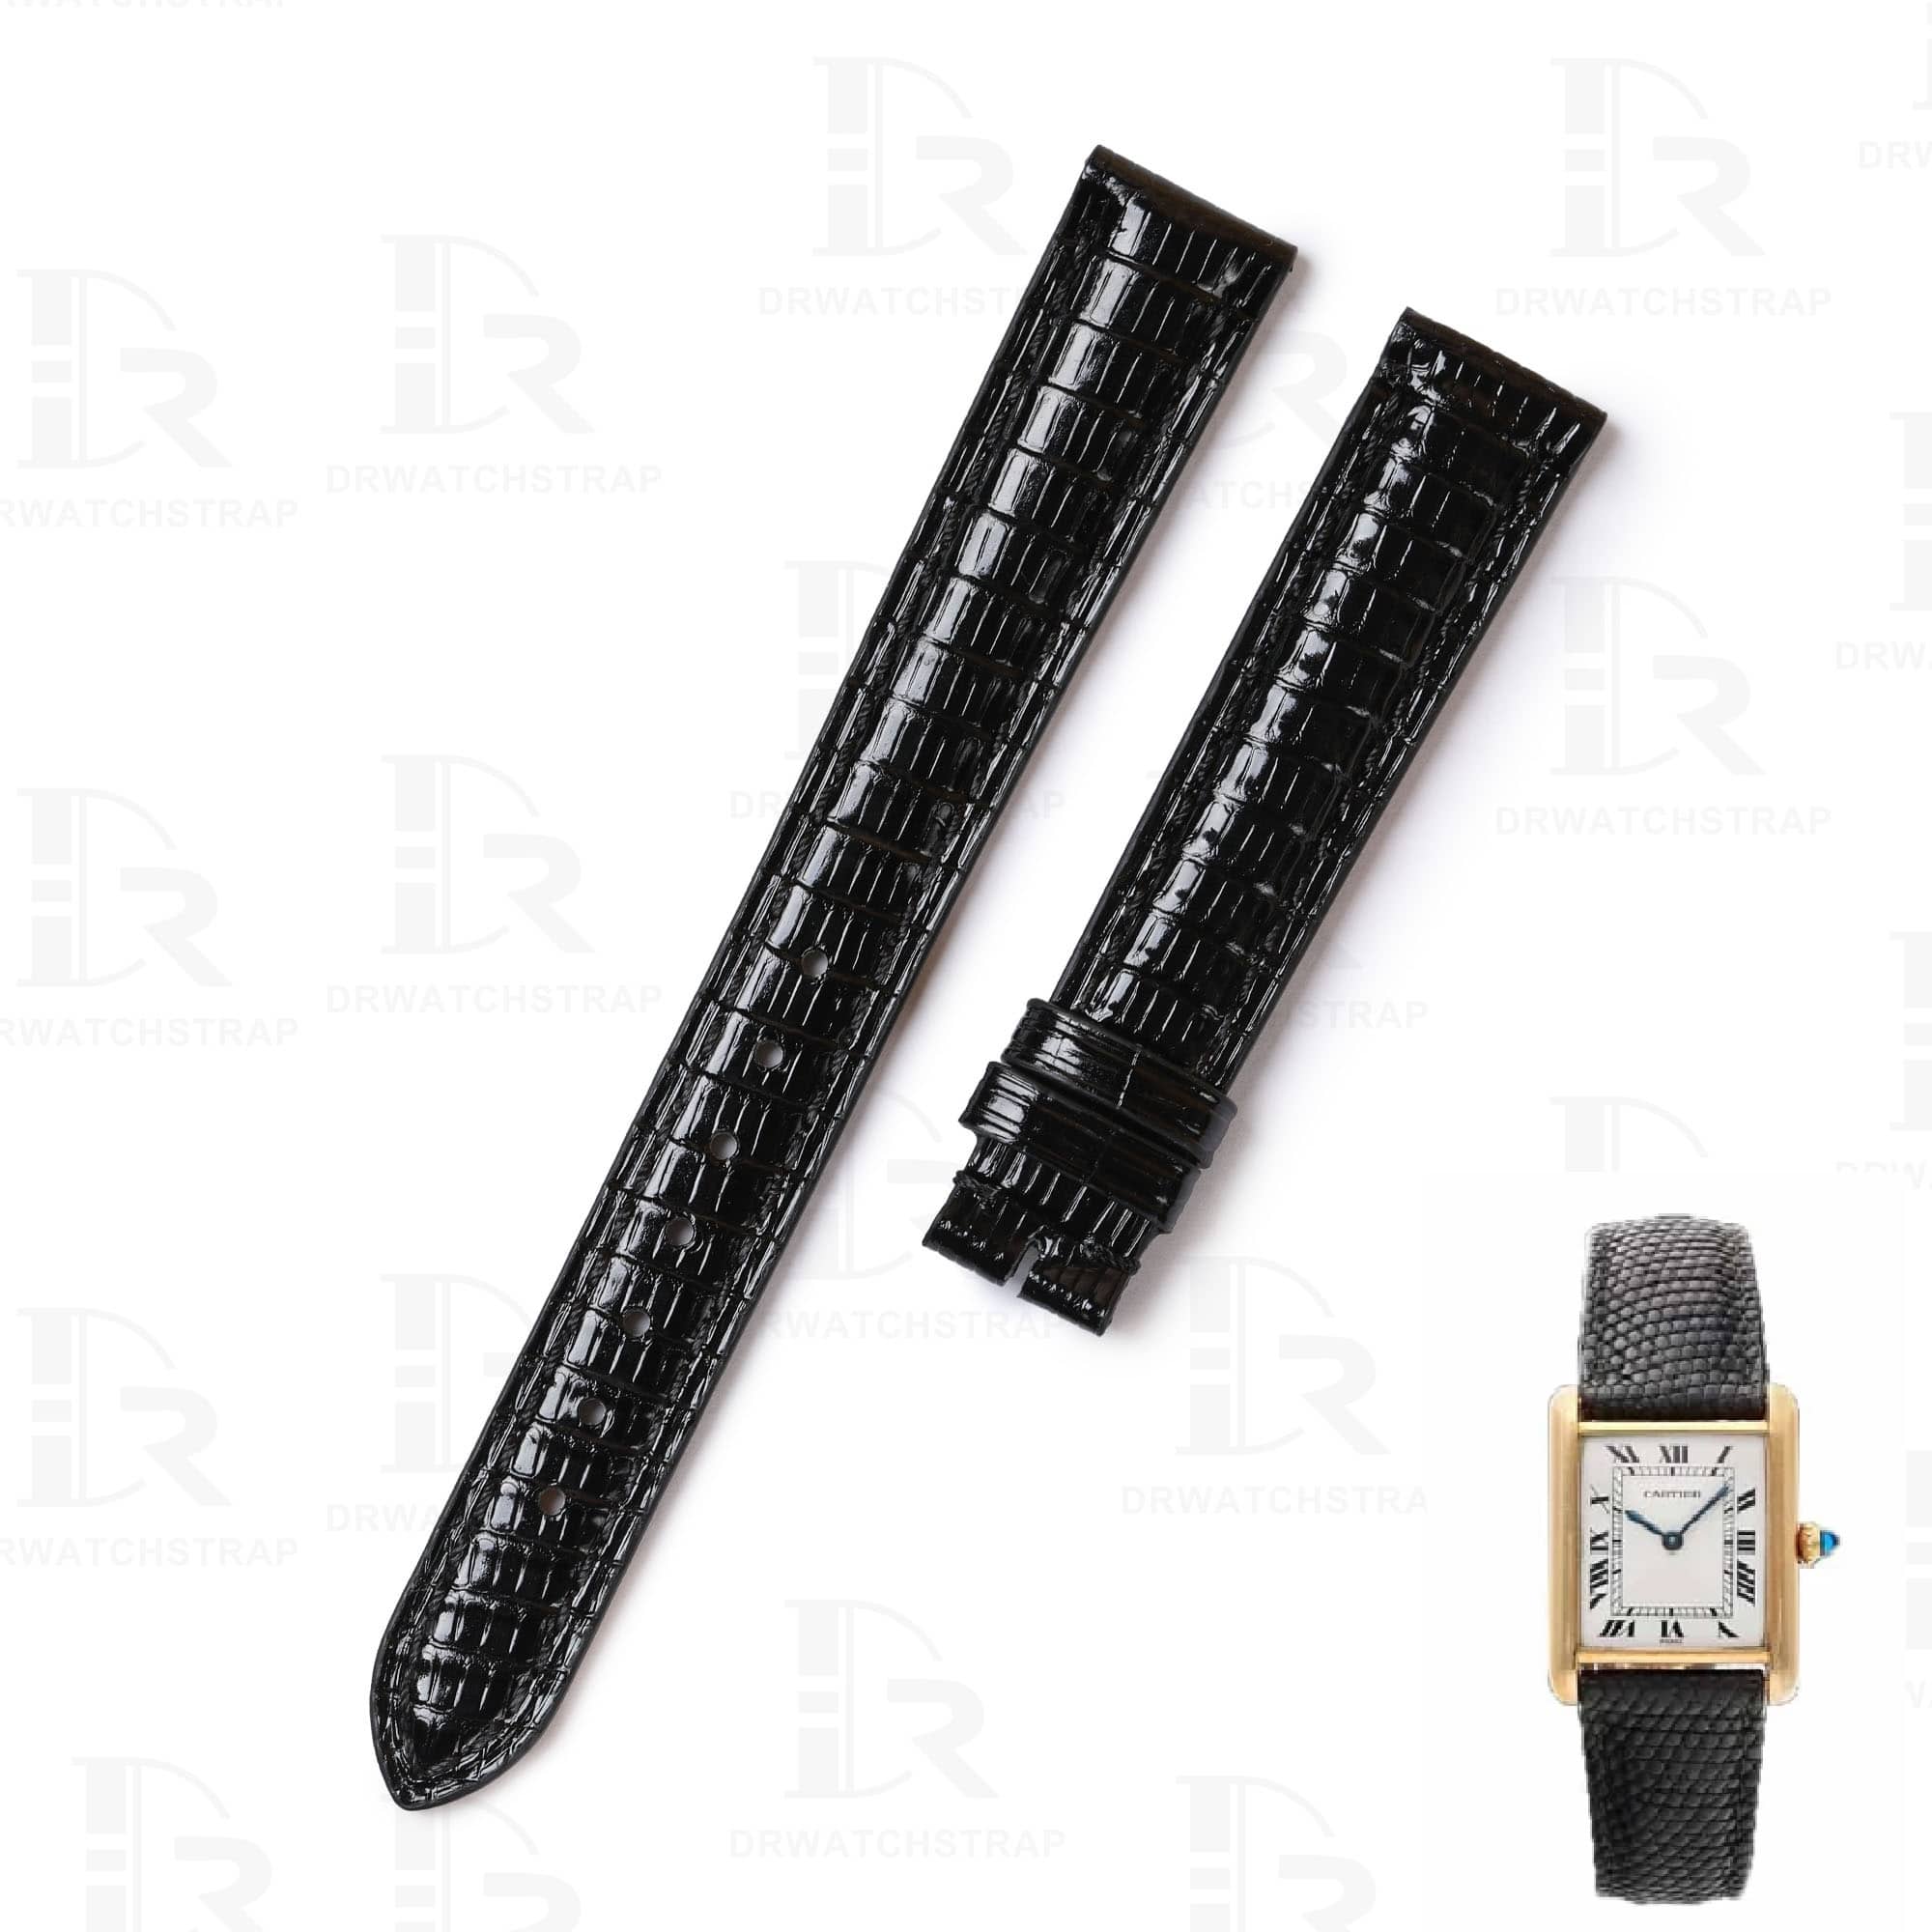 Best high-end quality Lizard black replacement Cartier Tank leather strap and watch band fit for Cartier Tank (American tank, France tank, Must, and so on) with pin buckle watchbands online for sale at a low price